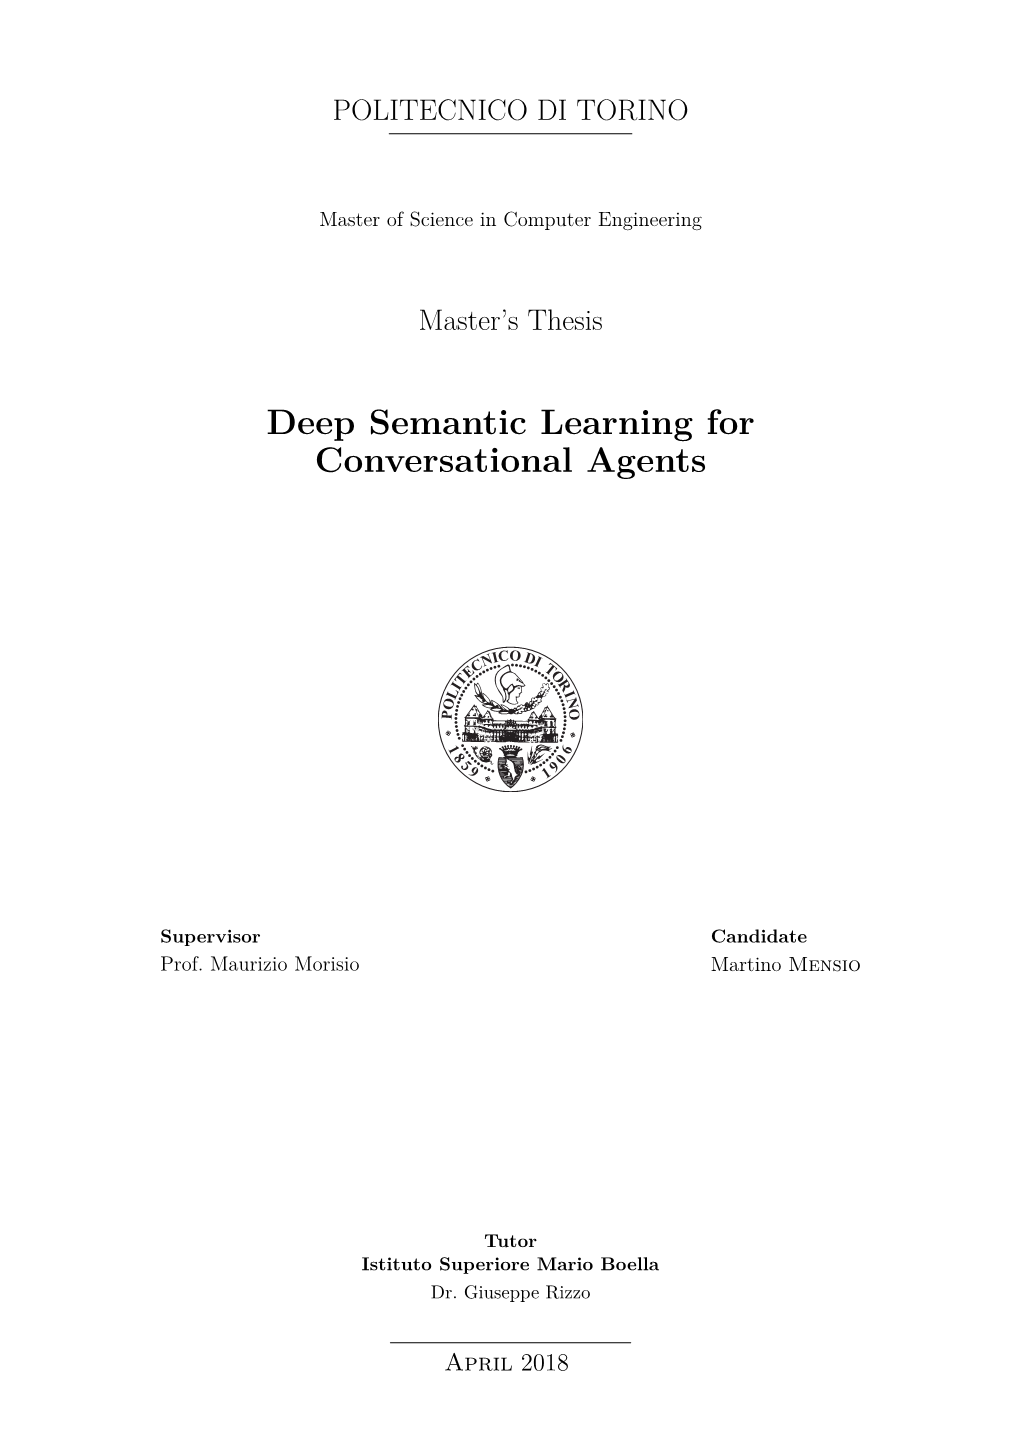 Deep Semantic Learning for Conversational Agents